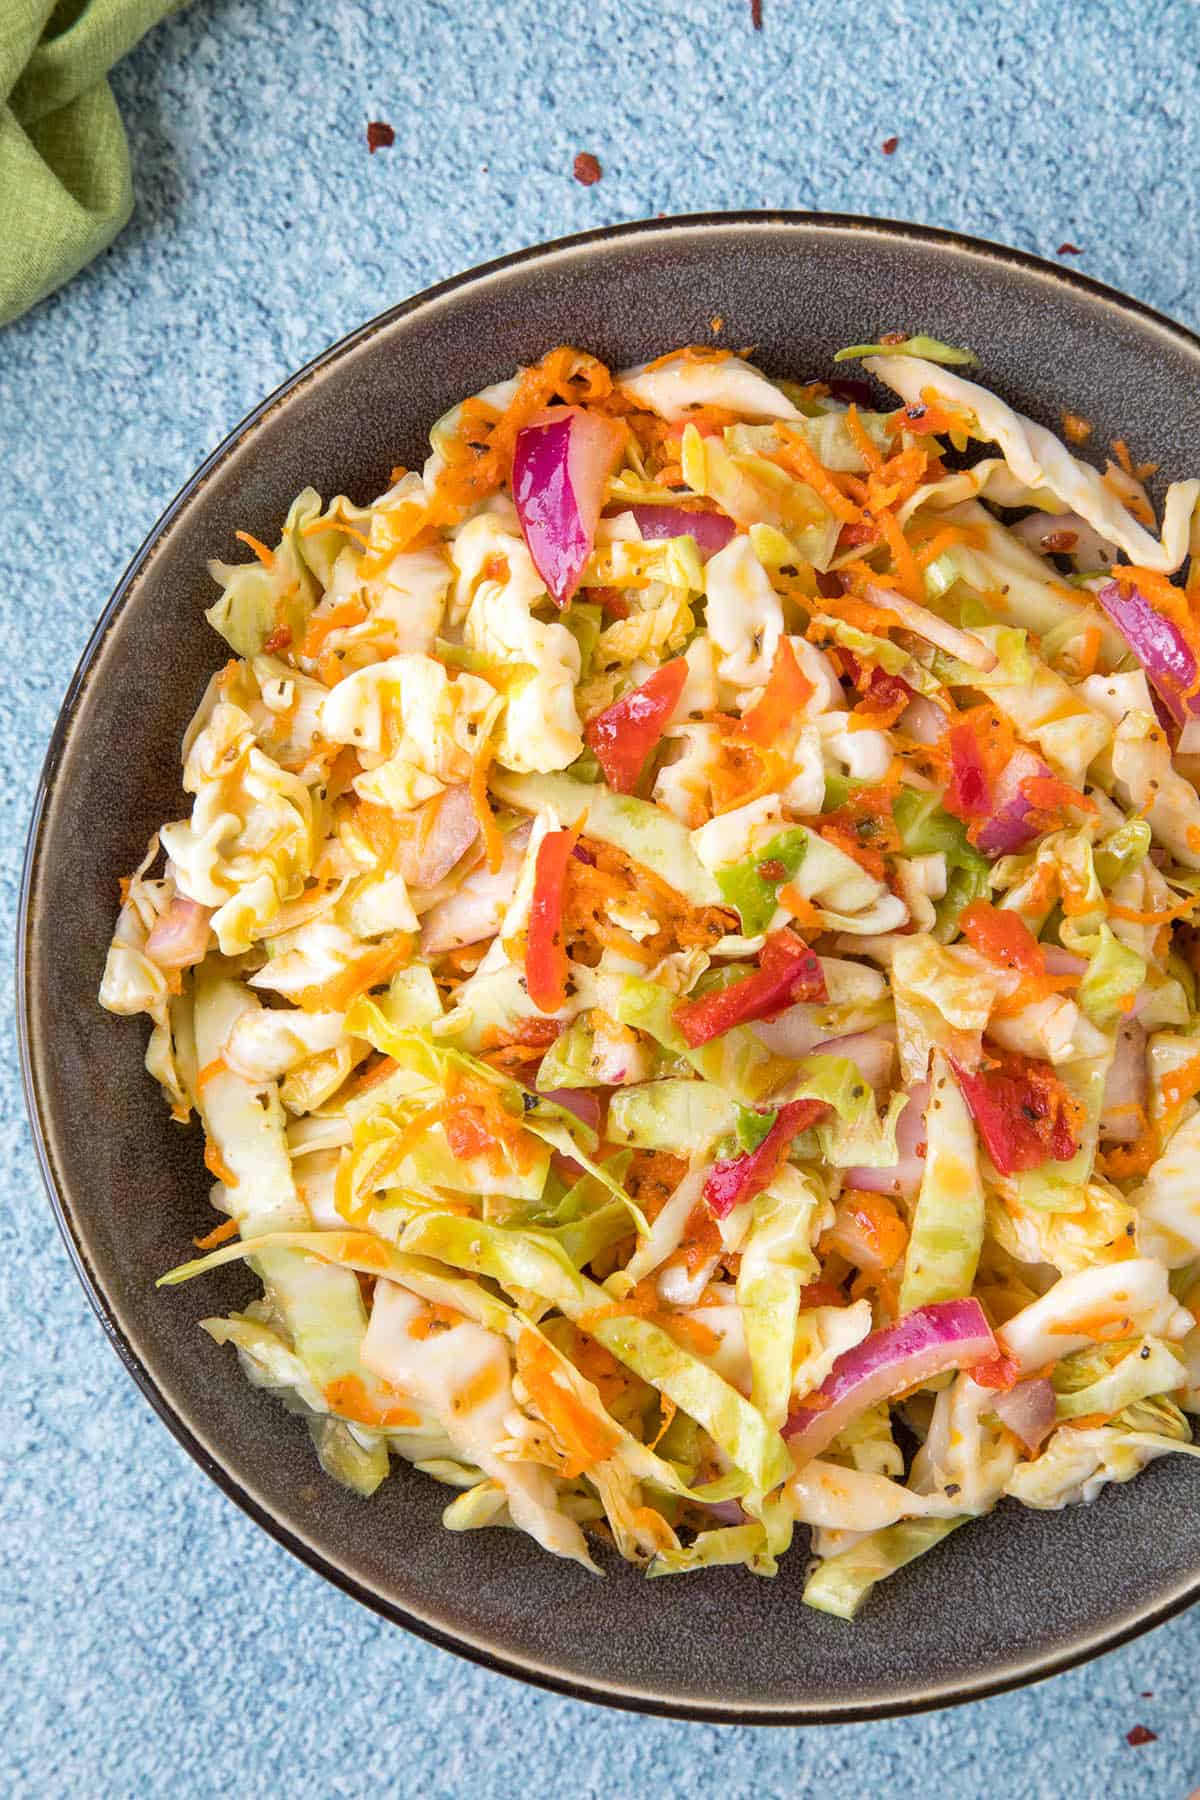 Vinegar Coleslaw Recipe - Sweet and Tangy - Chili Pepper Madness